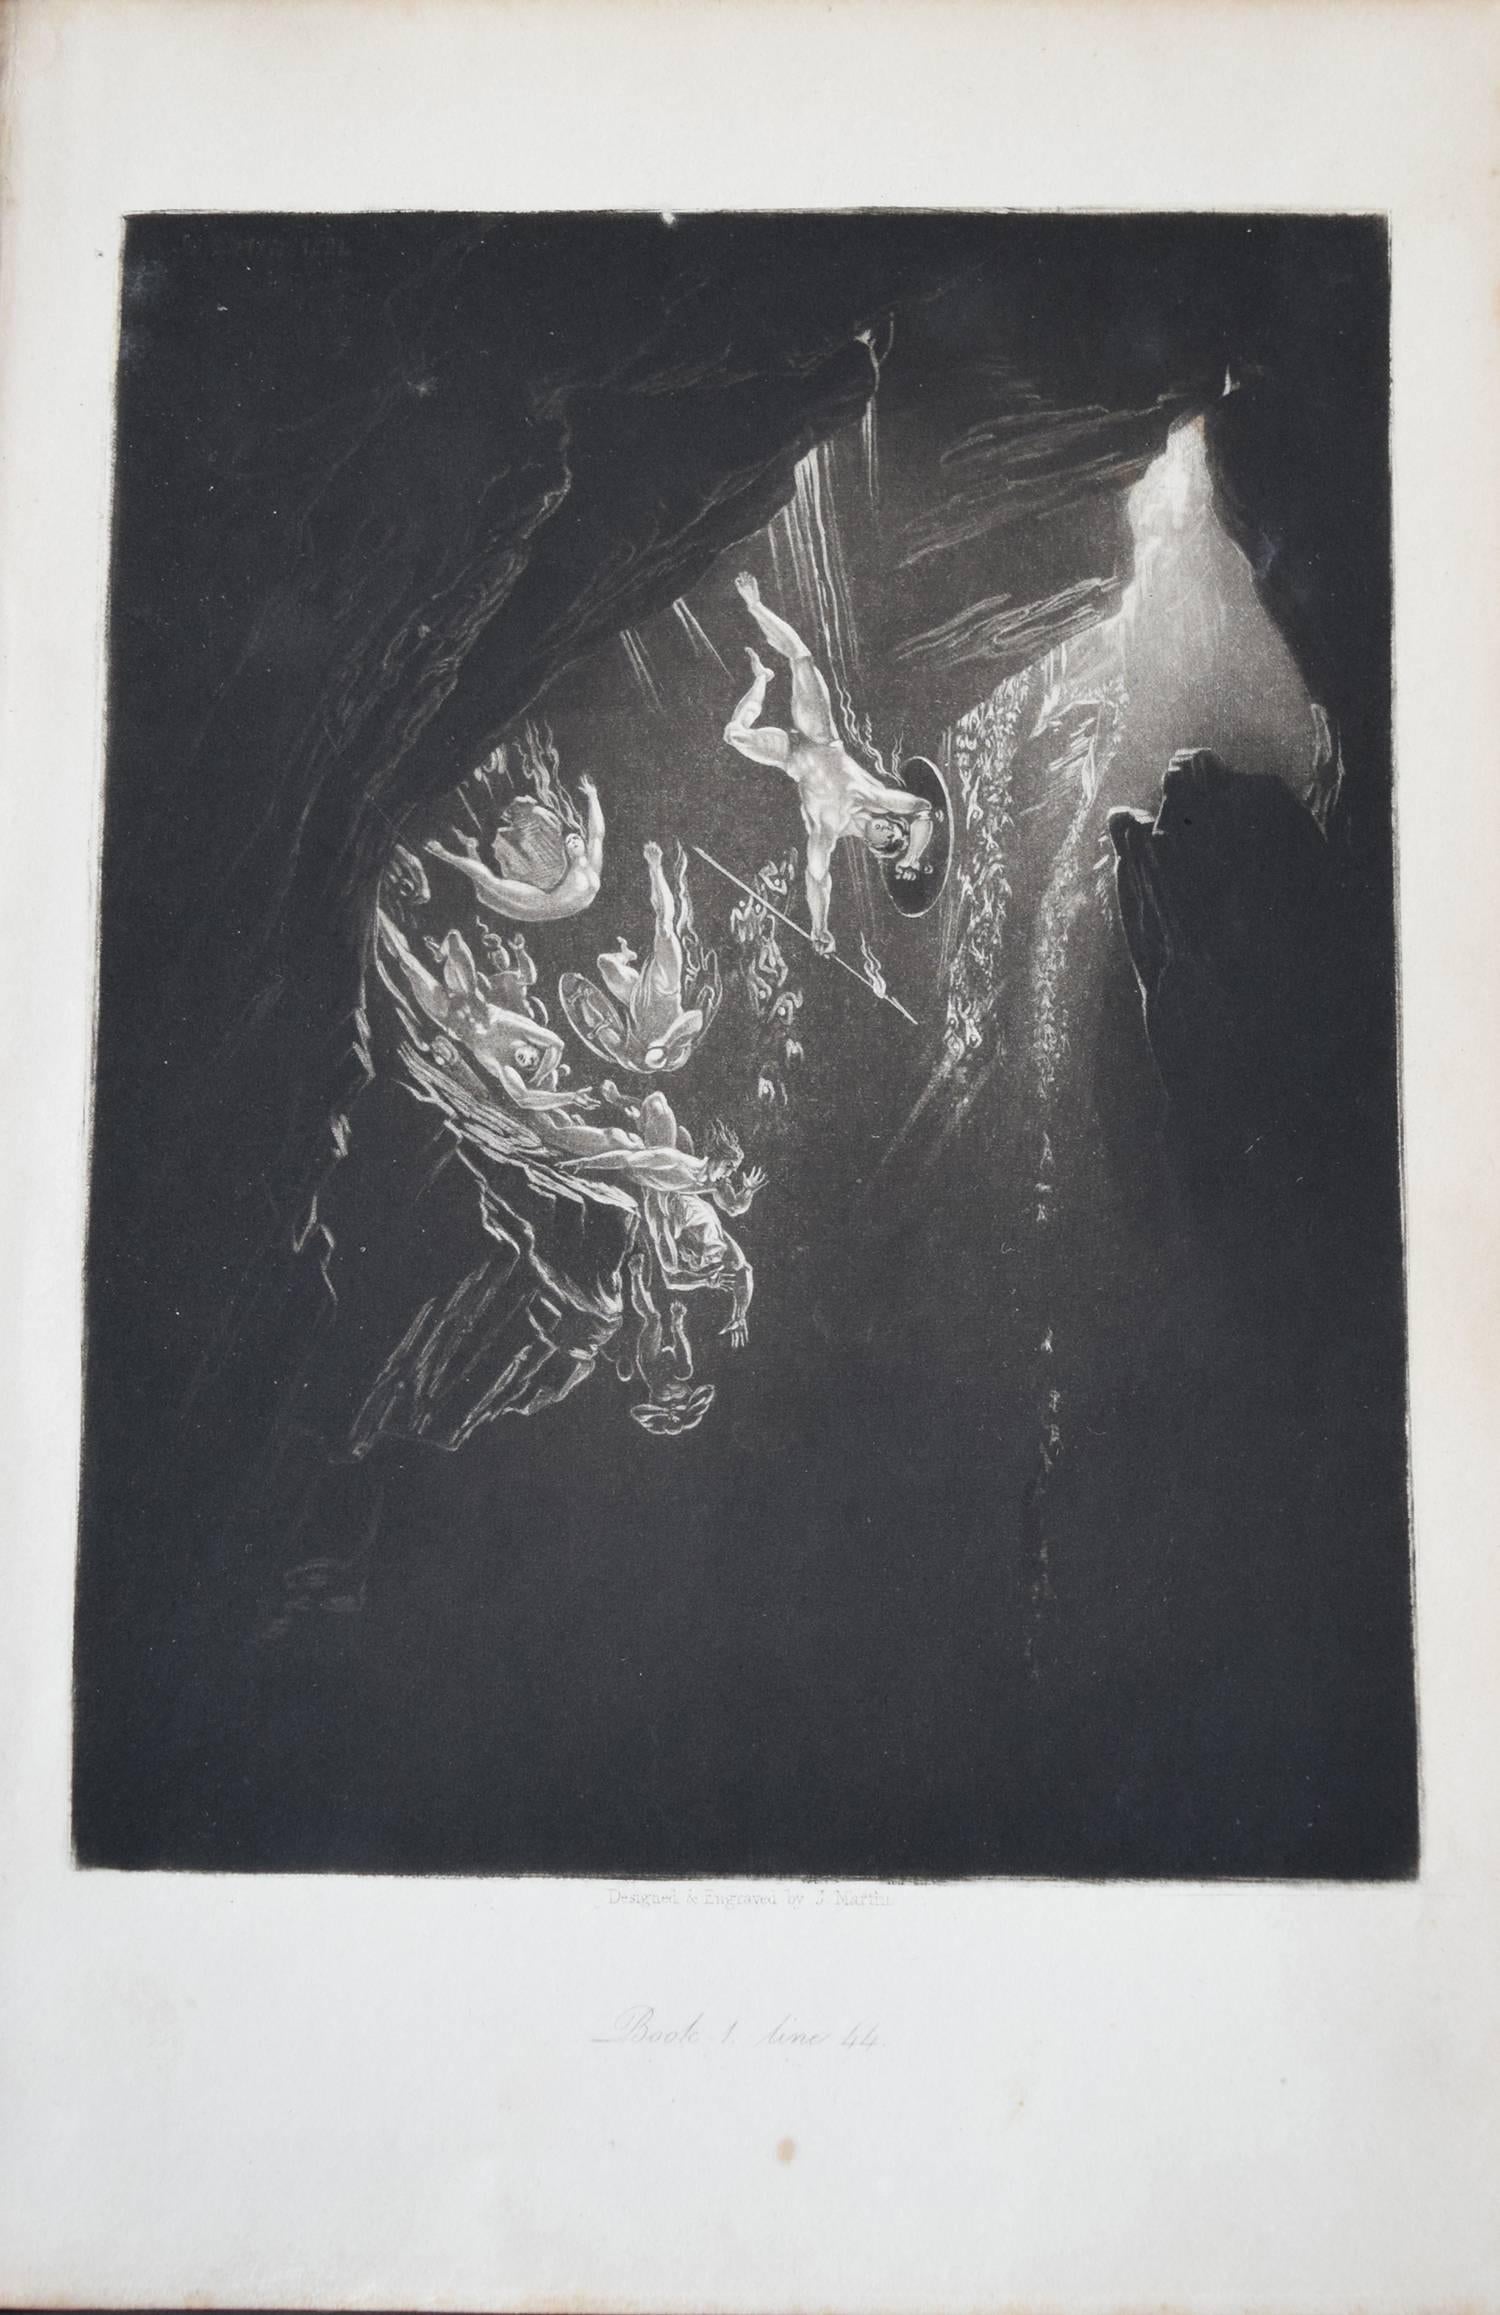 
Wonderful mezzotint by John Martin from John Milton's Paradise Lost.

Published by Septimus Prowett, 1827. 

Unframed.

Full margins.

On good quality wove paper.

We can frame the print for you if you require.